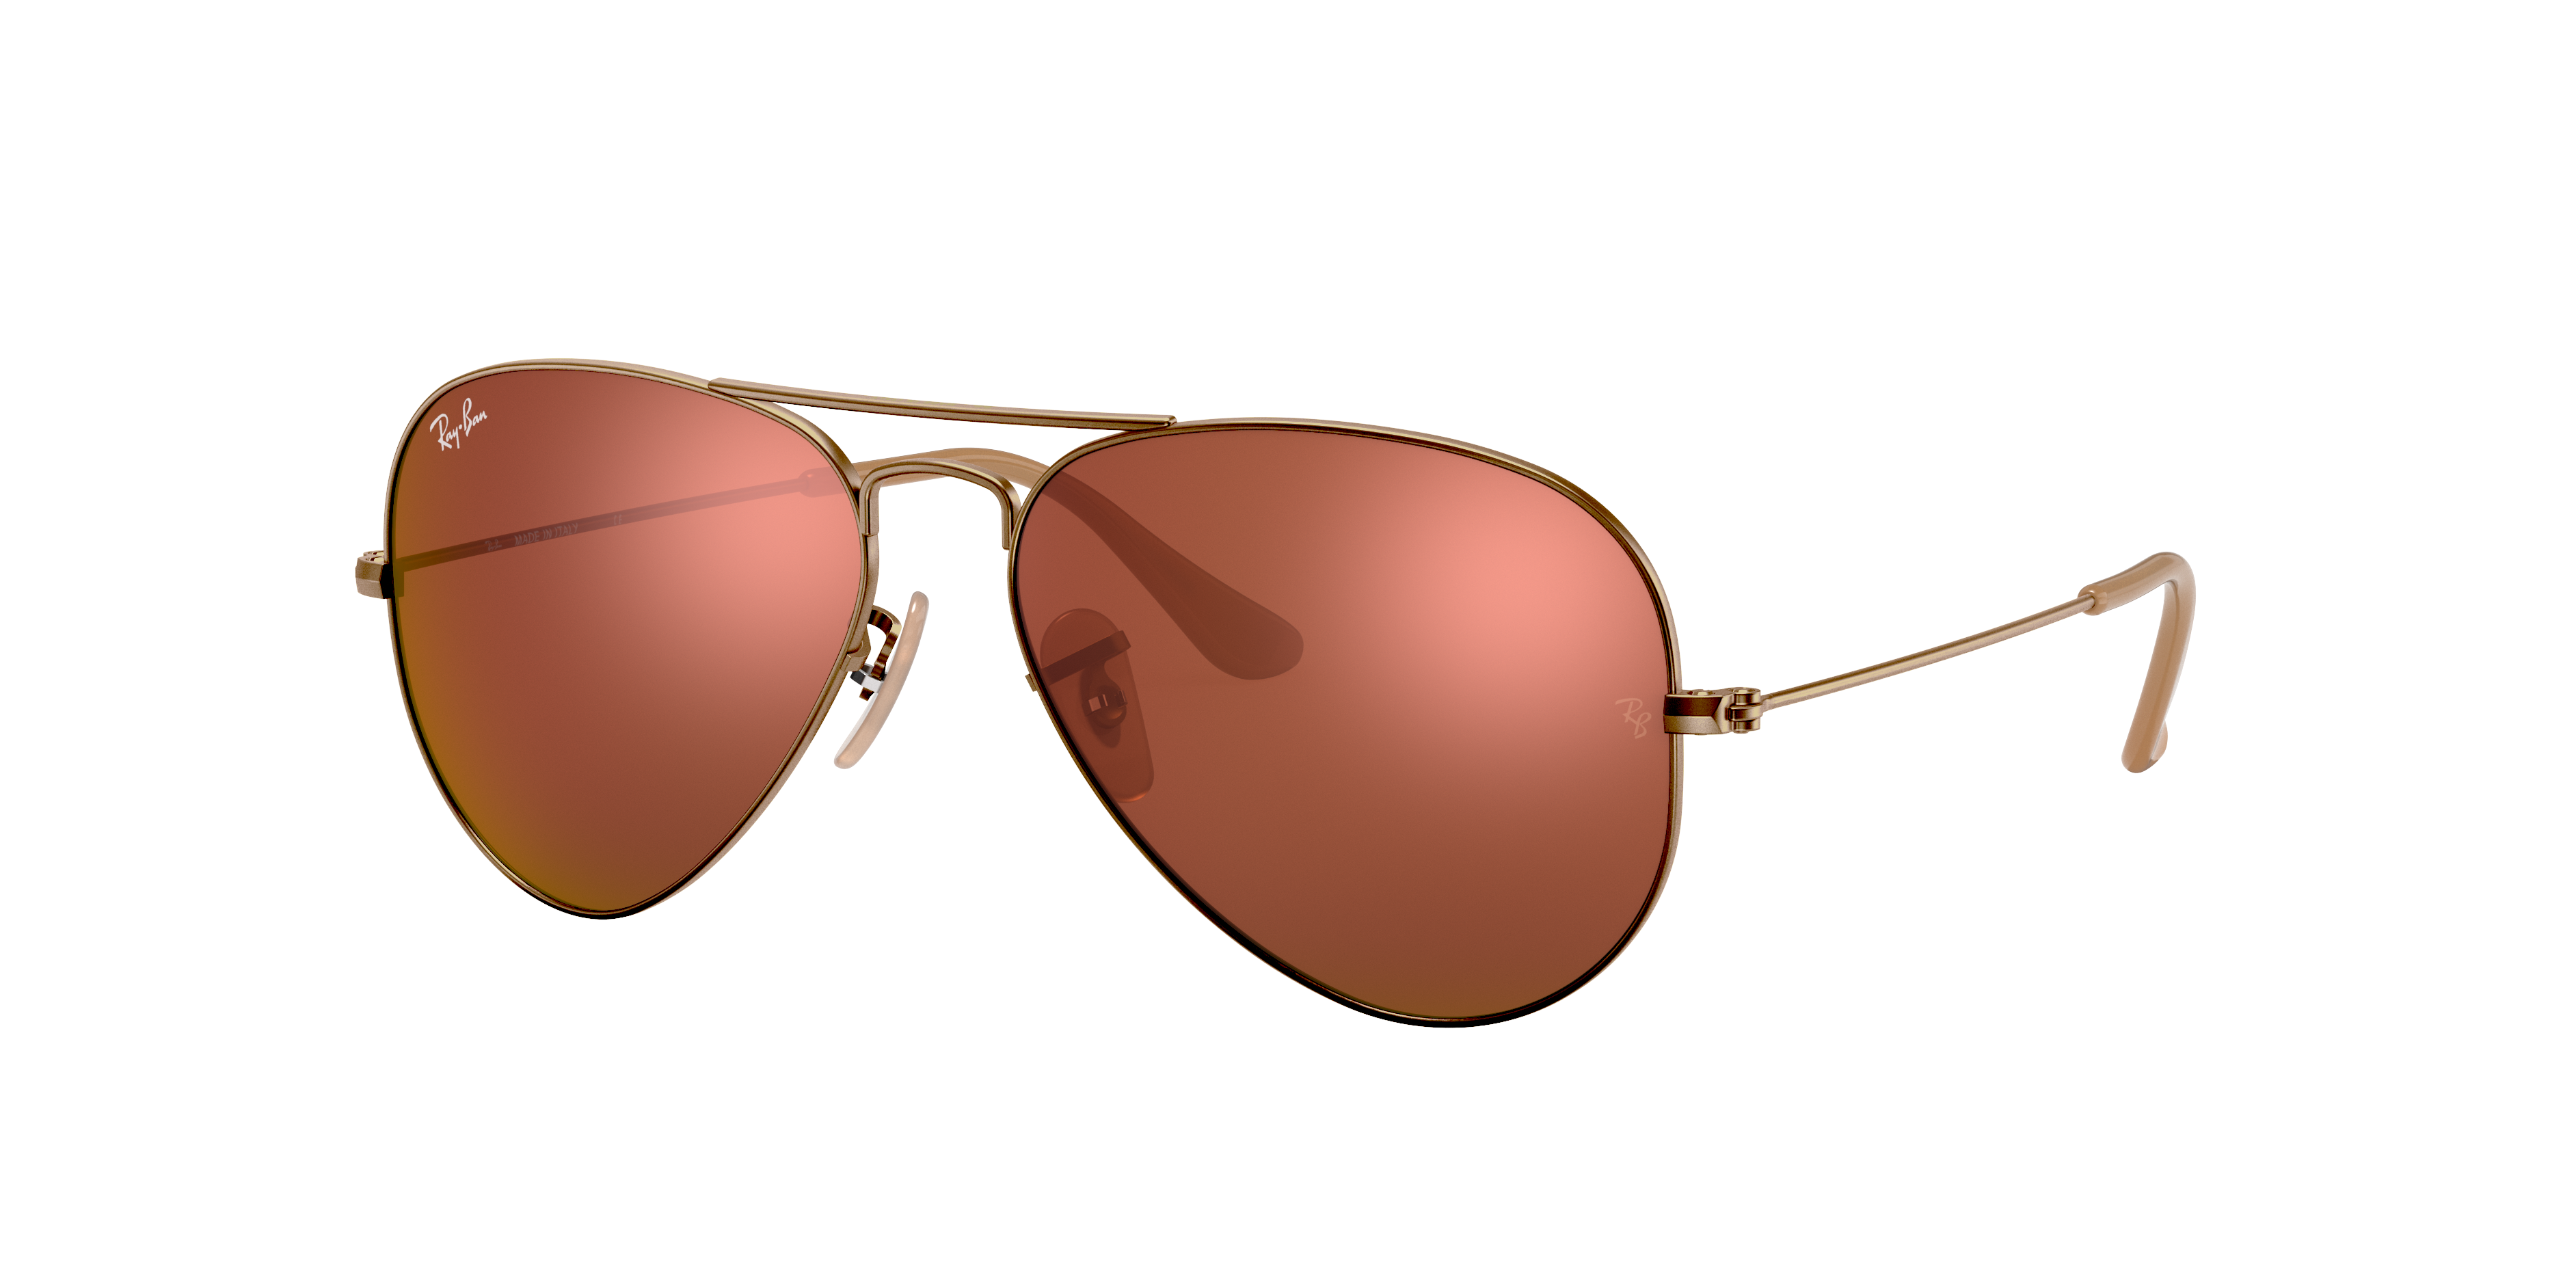 ray ban glasses with red writing inside